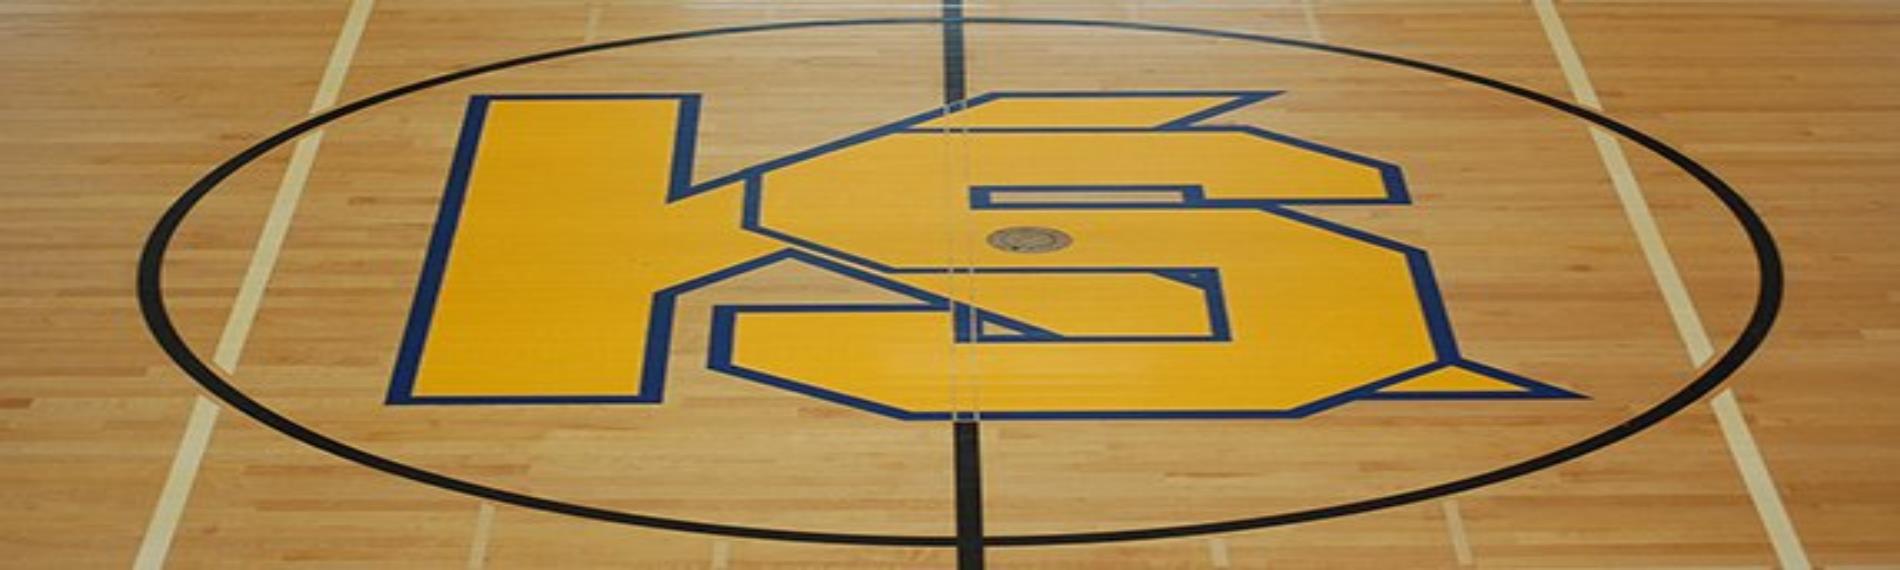 logo on the center of the basketball court